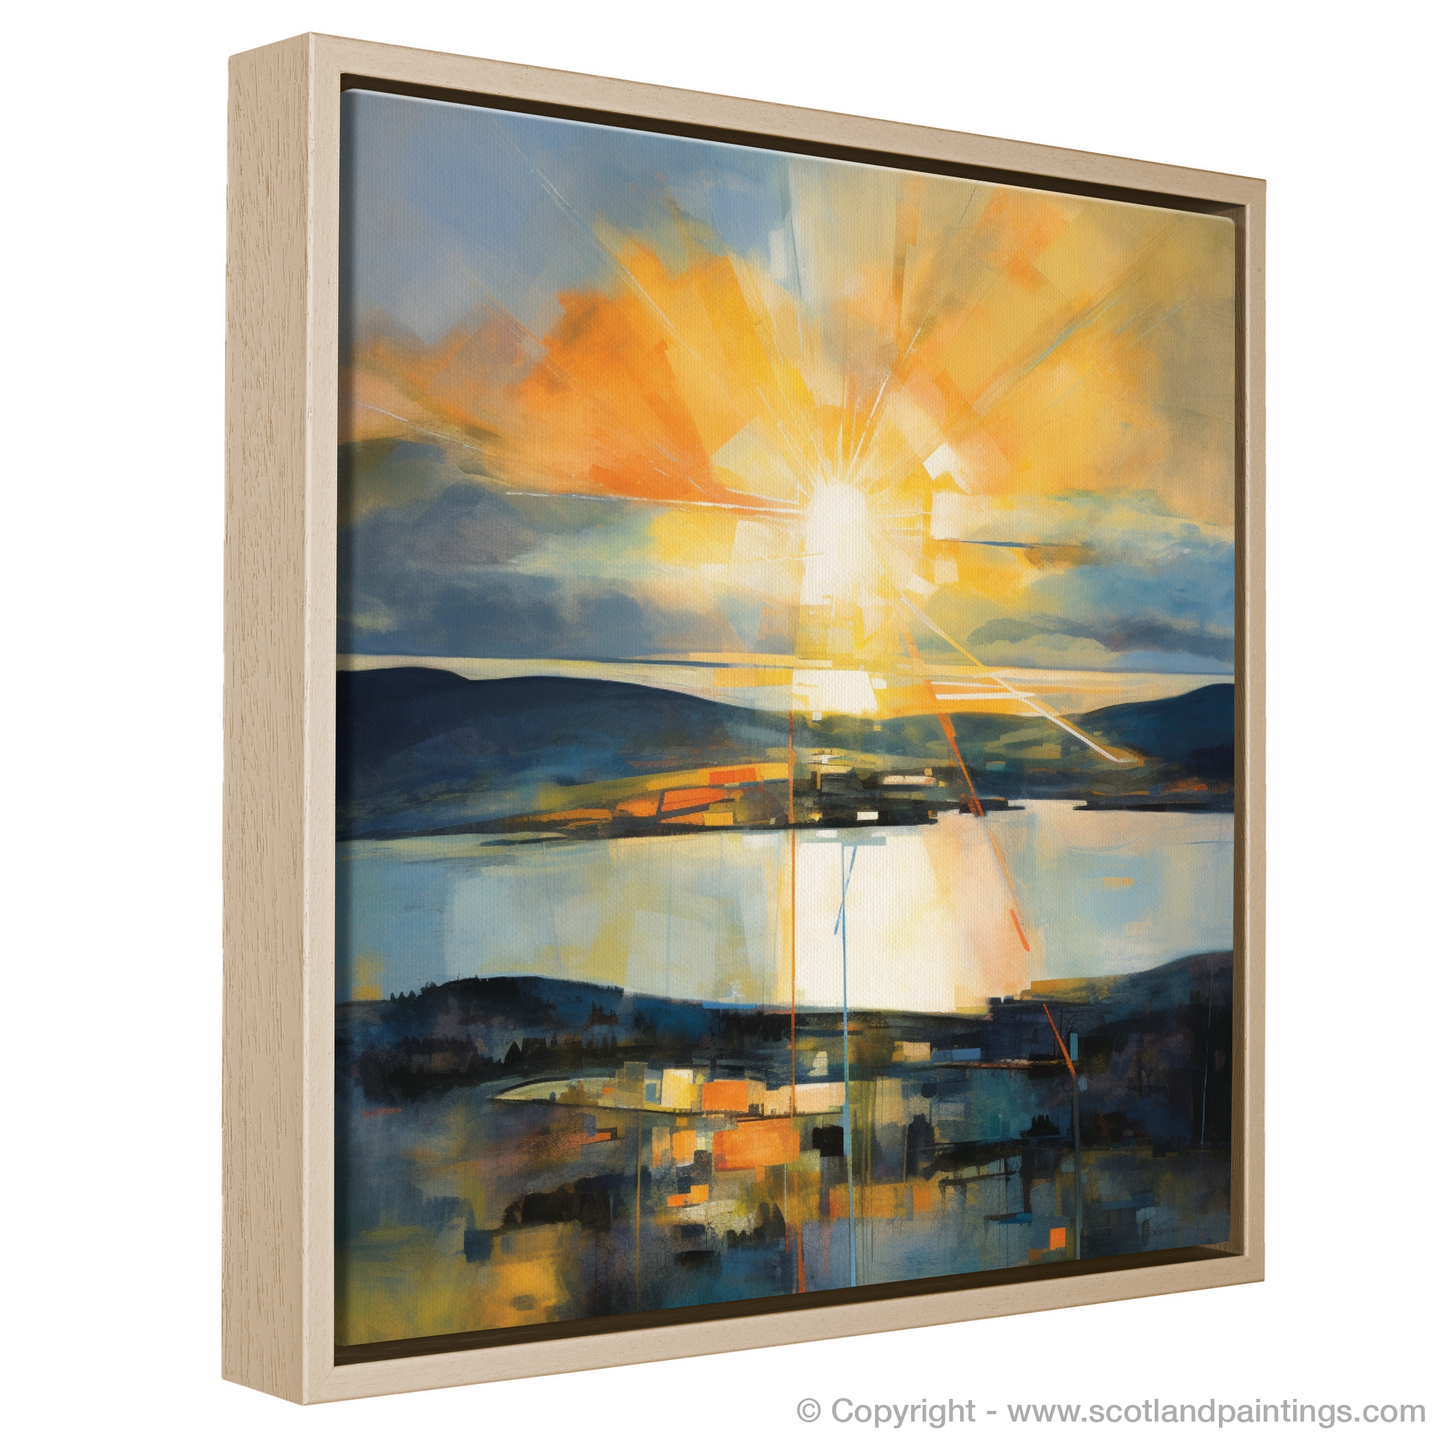 Painting and Art Print of Crepuscular rays above Loch Lomond entitled "Sunset Symphony over Loch Lomond".